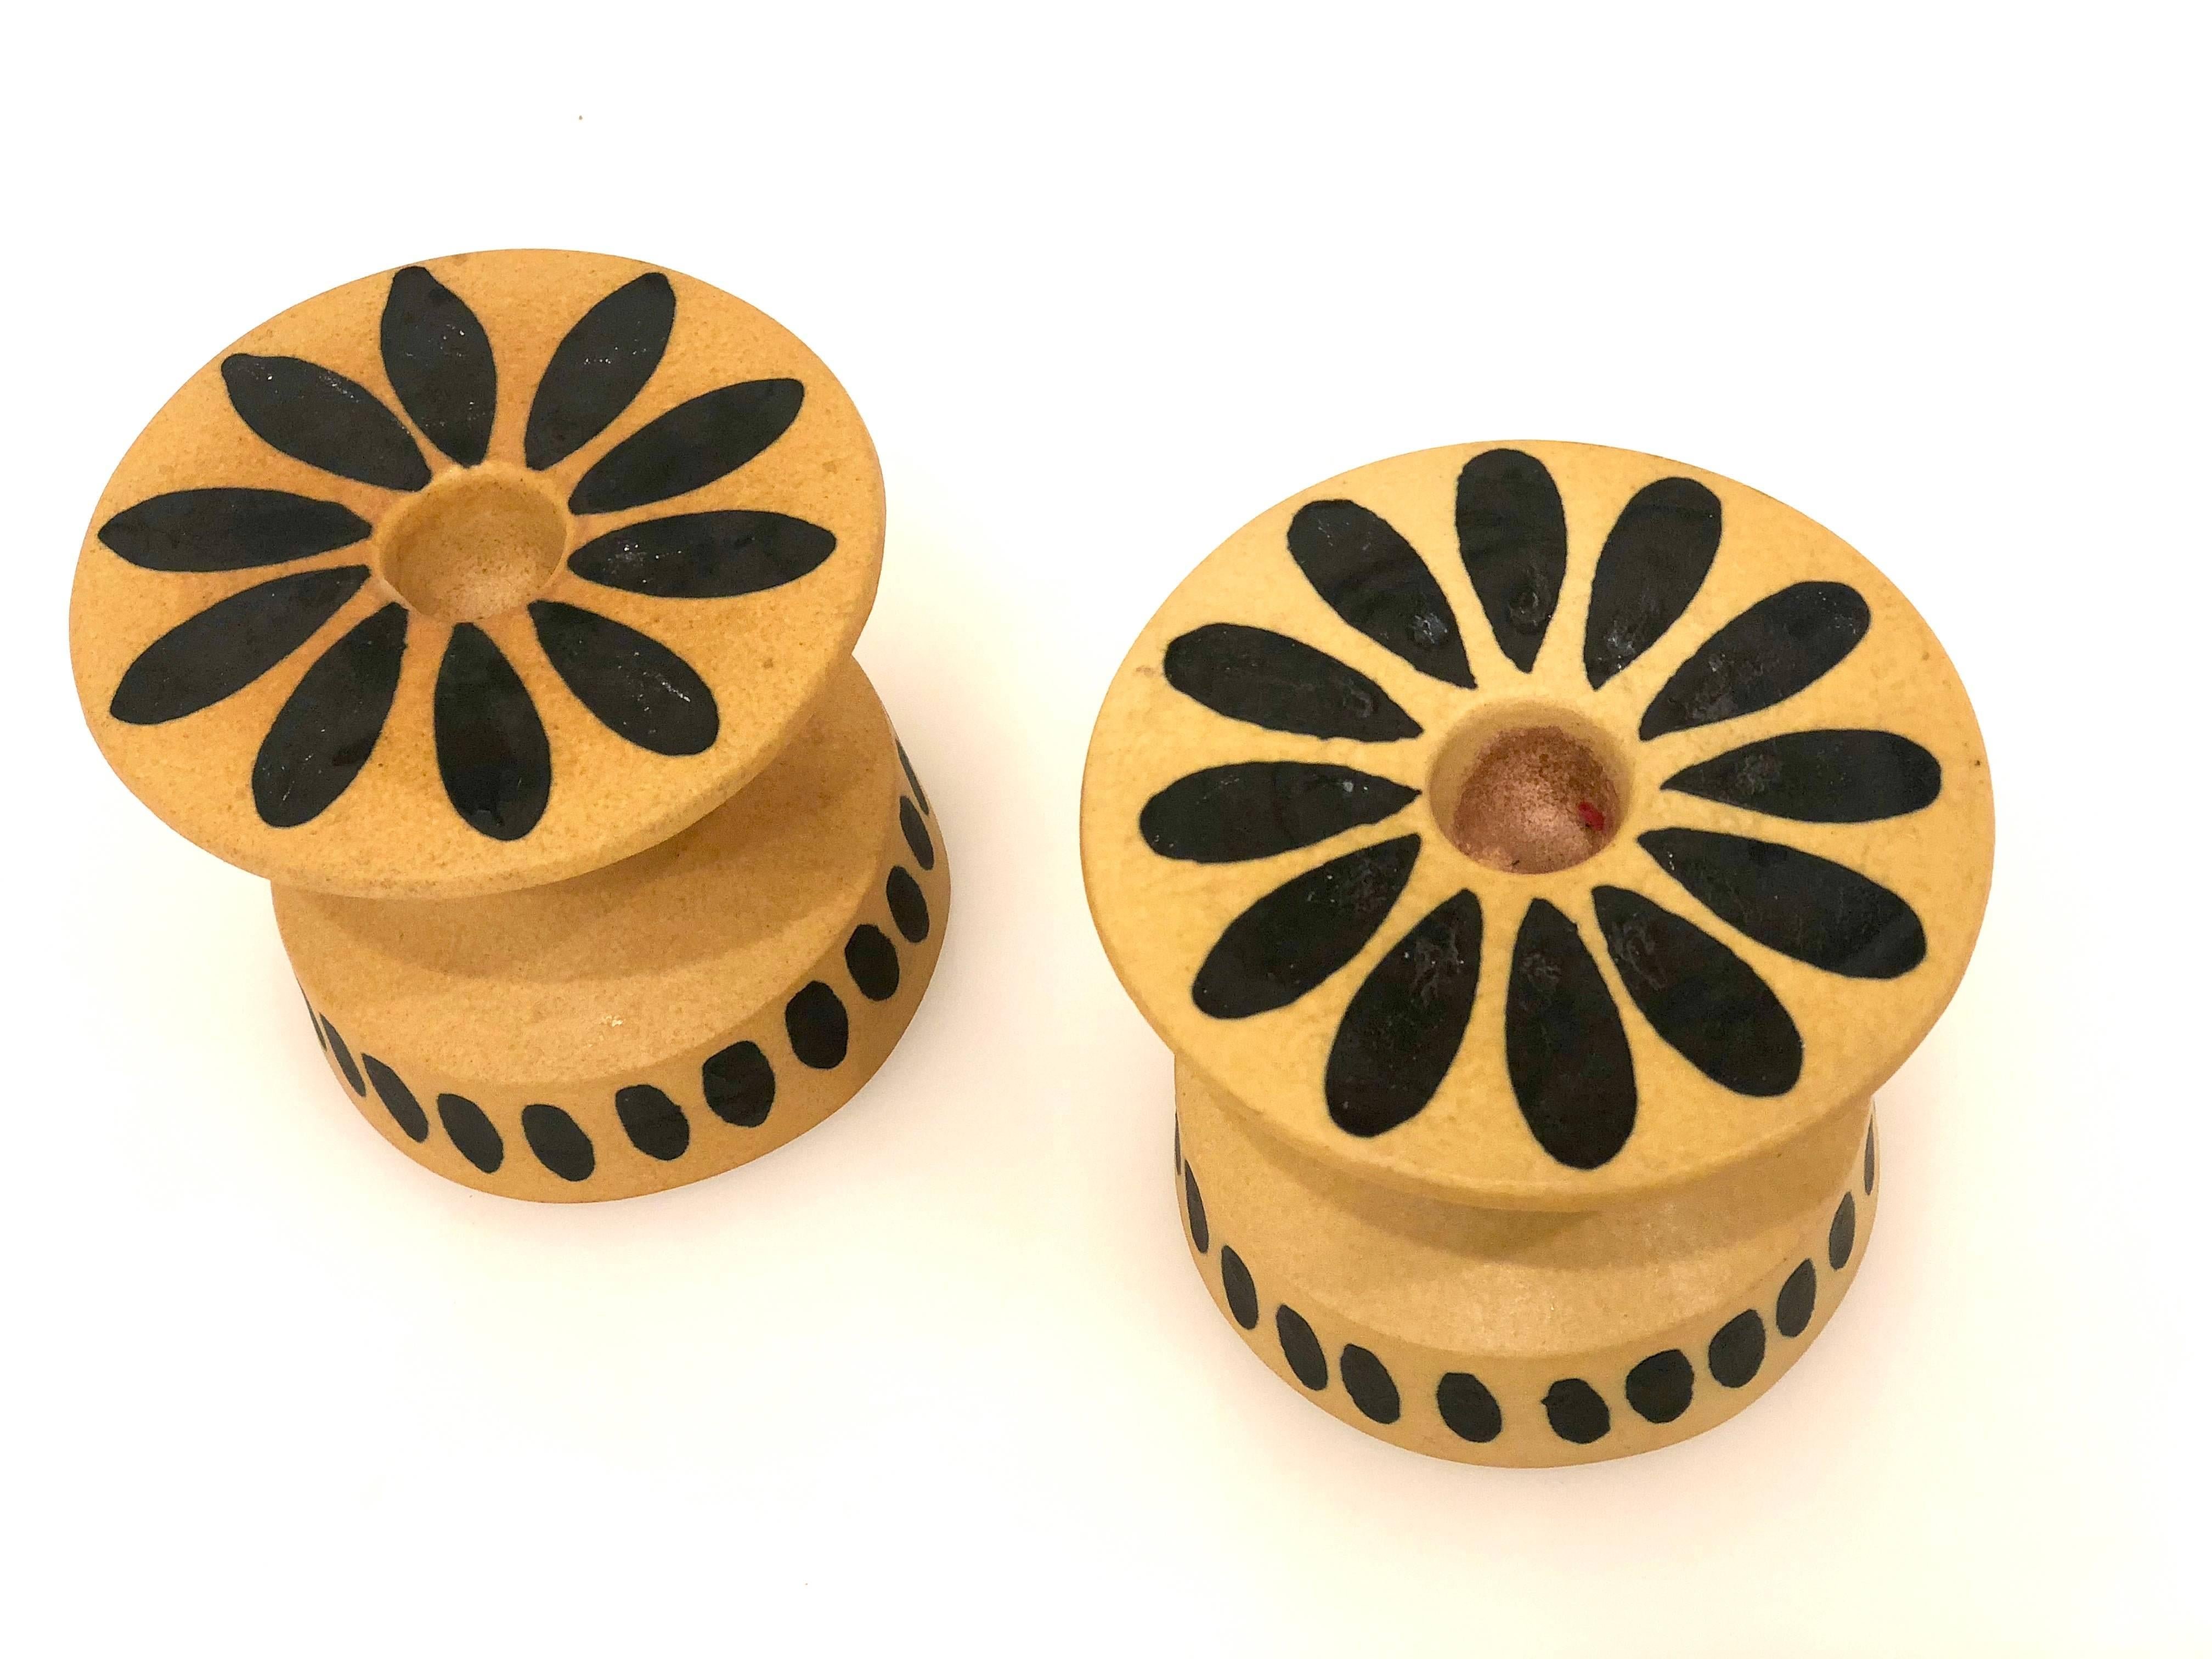 Beautiful and rare pair of ceramic candleholders by Bennington Potters, in beautiful condition nice color and design. In mustard and black design.